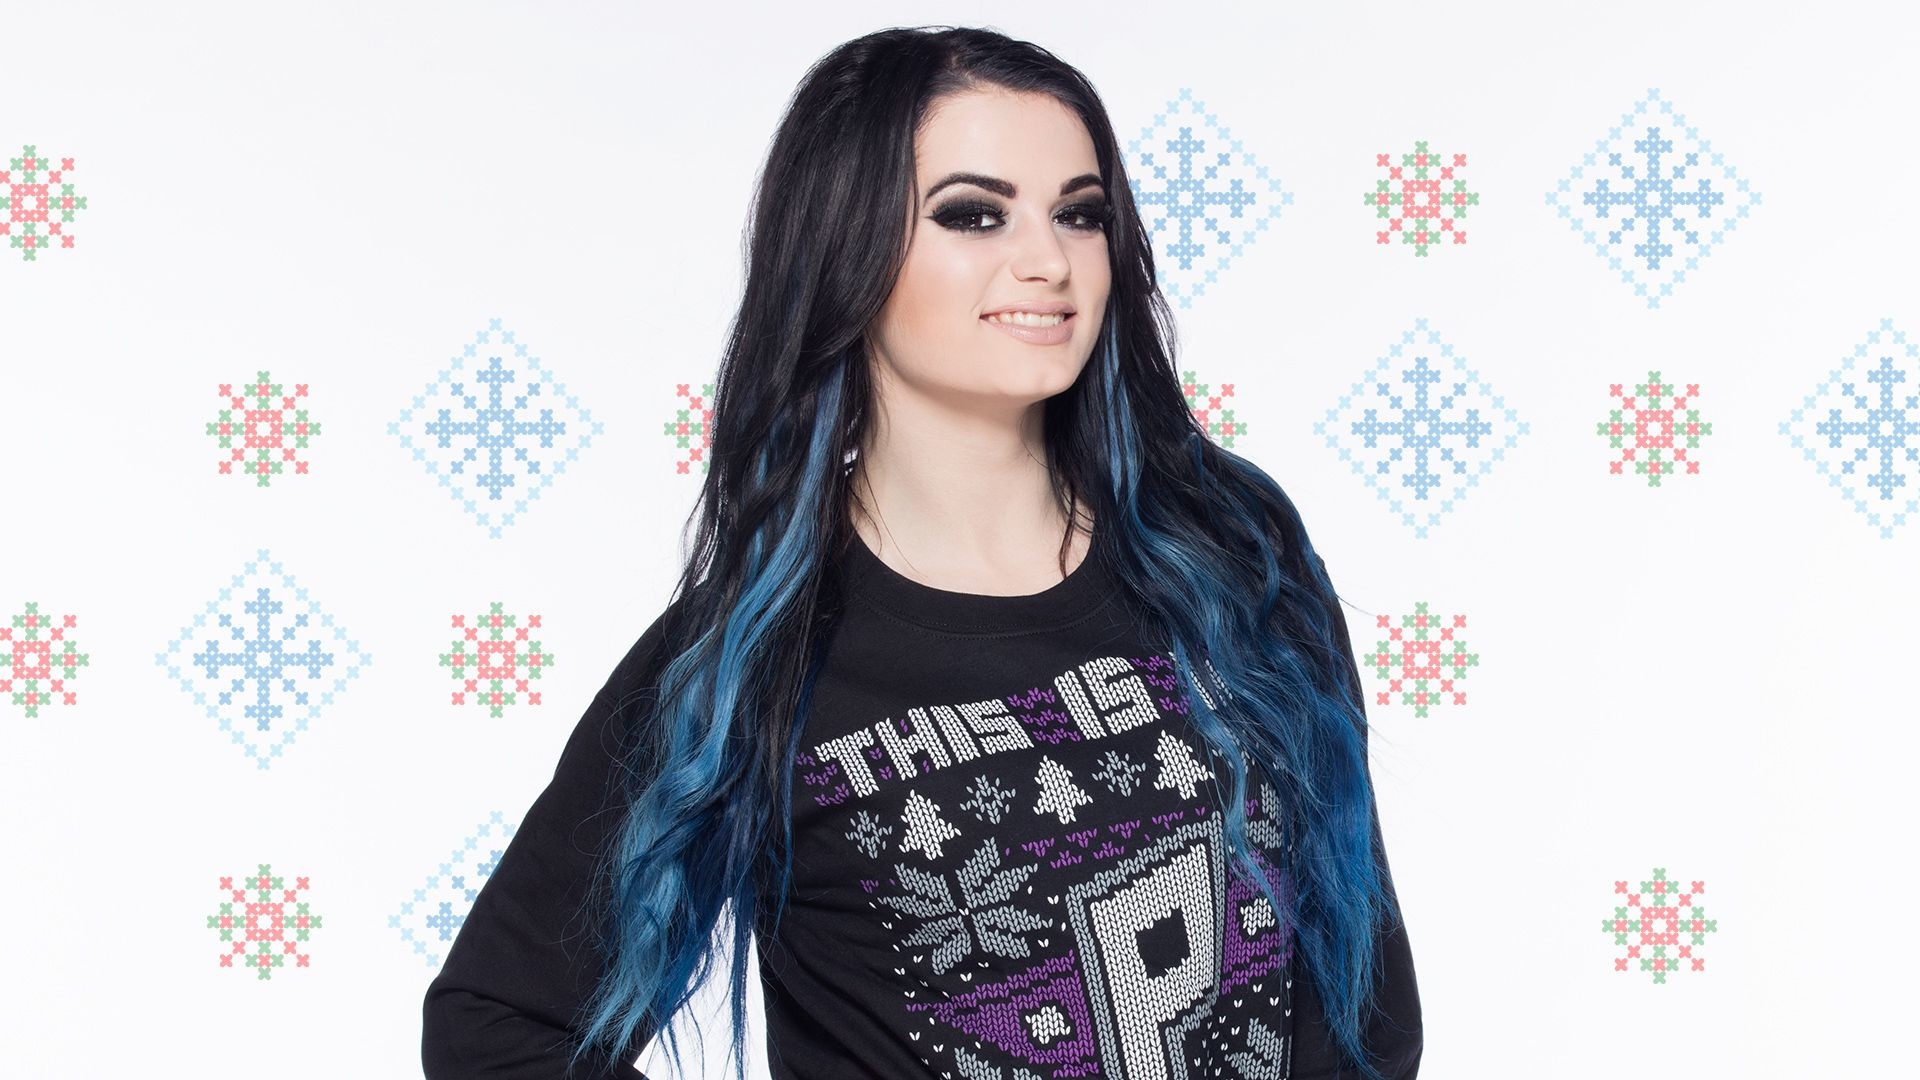 73 Wwe Paige Wallpapers on WallpaperPlay